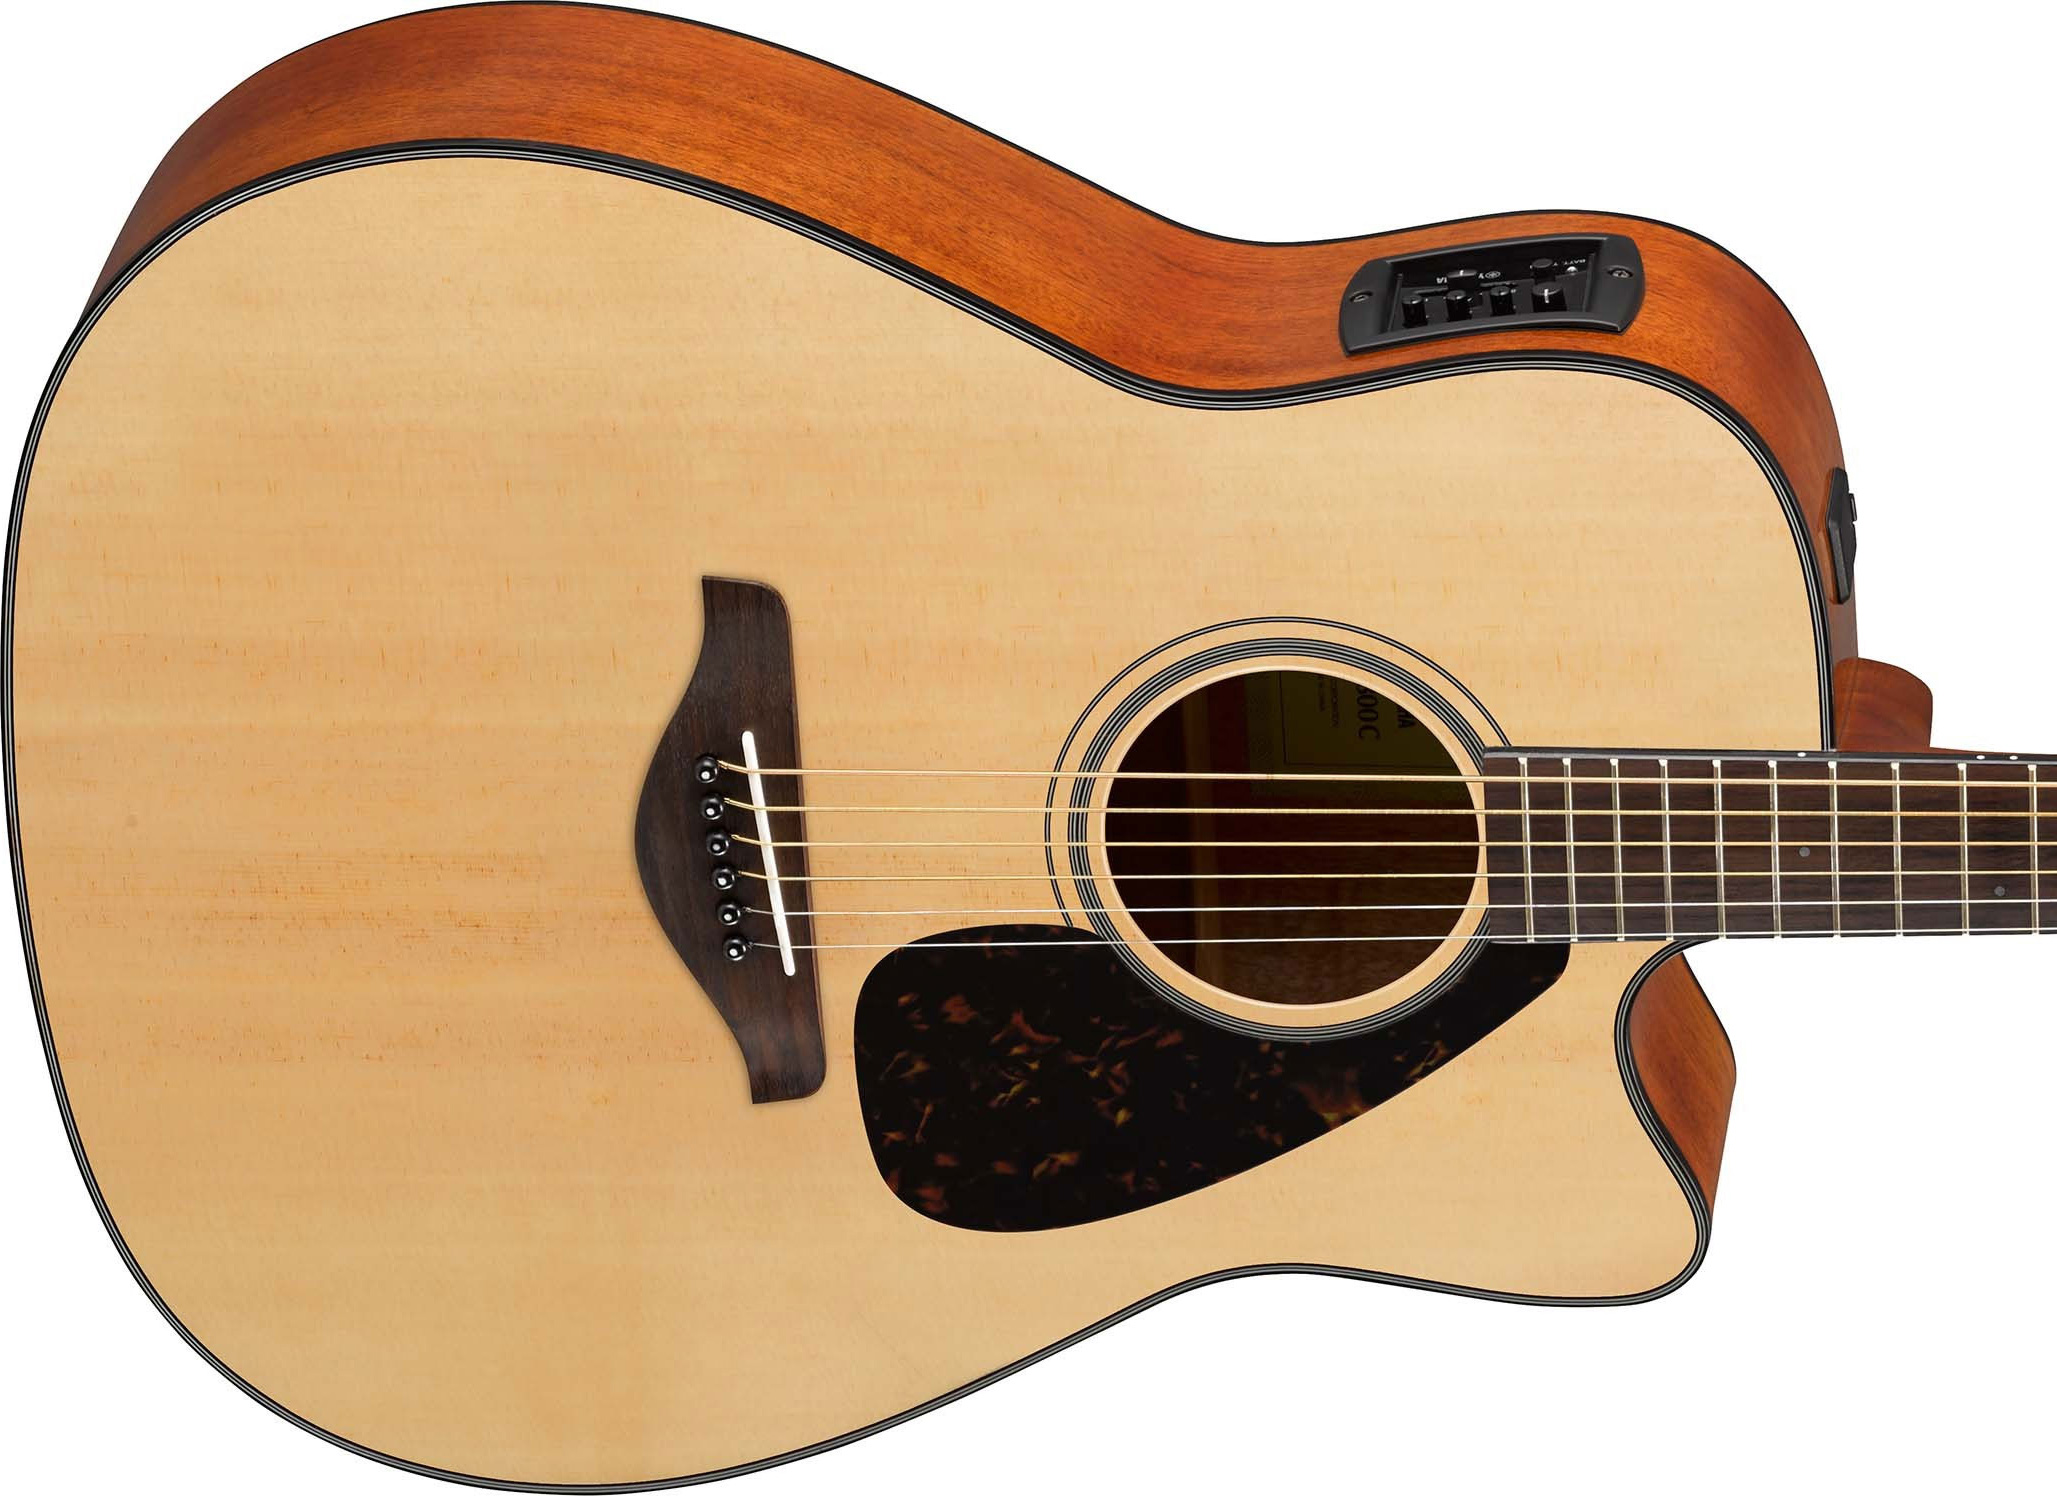 Yamaha Fgx800c Nt Dreadnought Cw Epicea Nato 2016 - Natural - Electro acoustic guitar - Variation 2